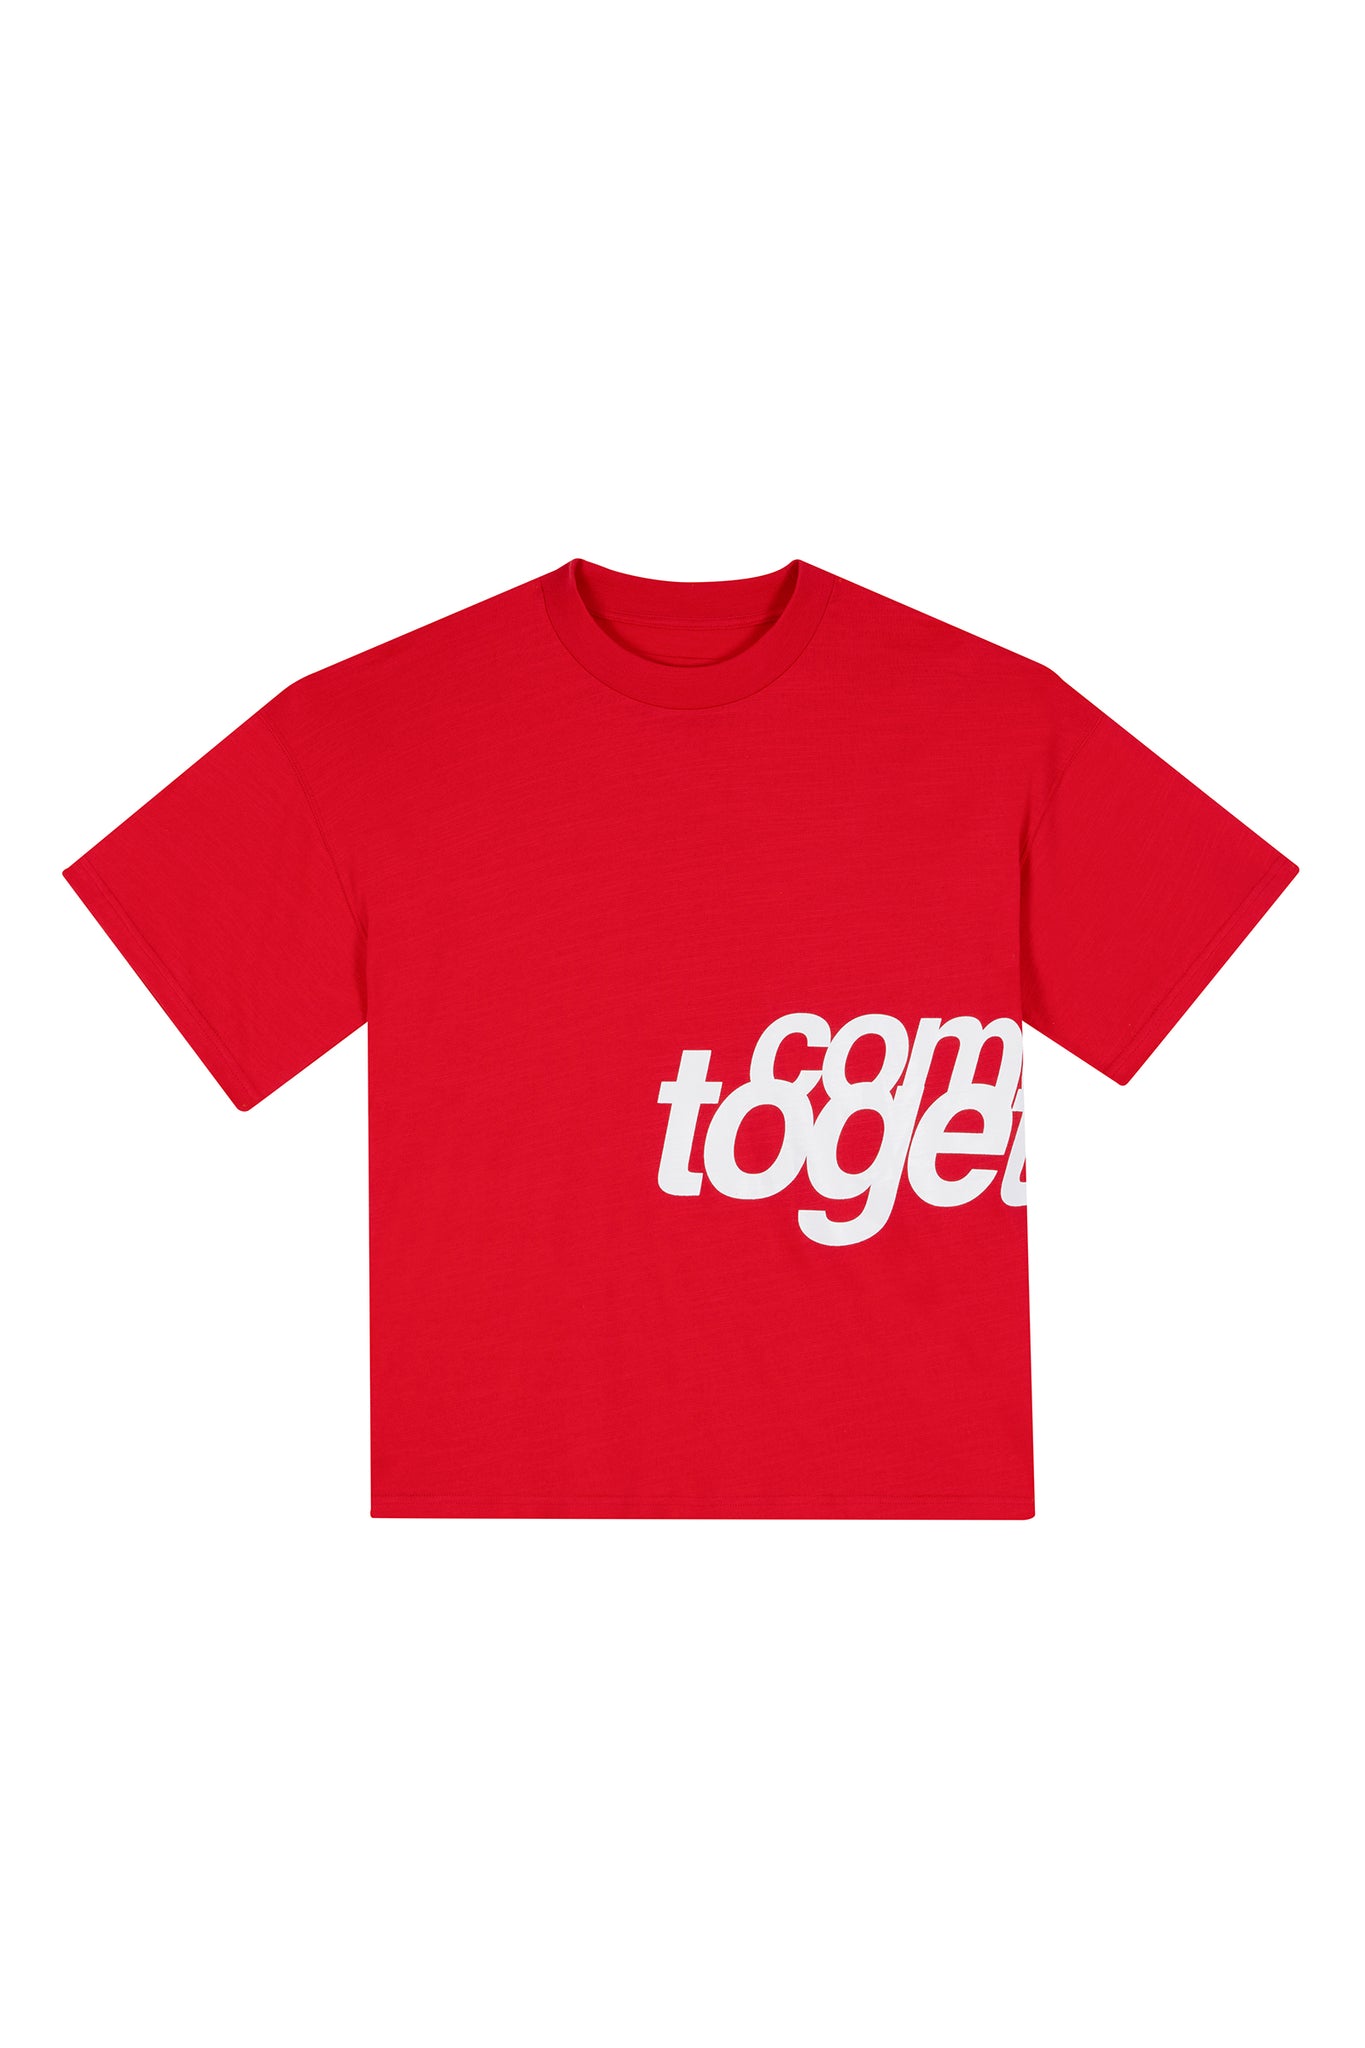 THE "COME TOGETHER" PRINTED TEE